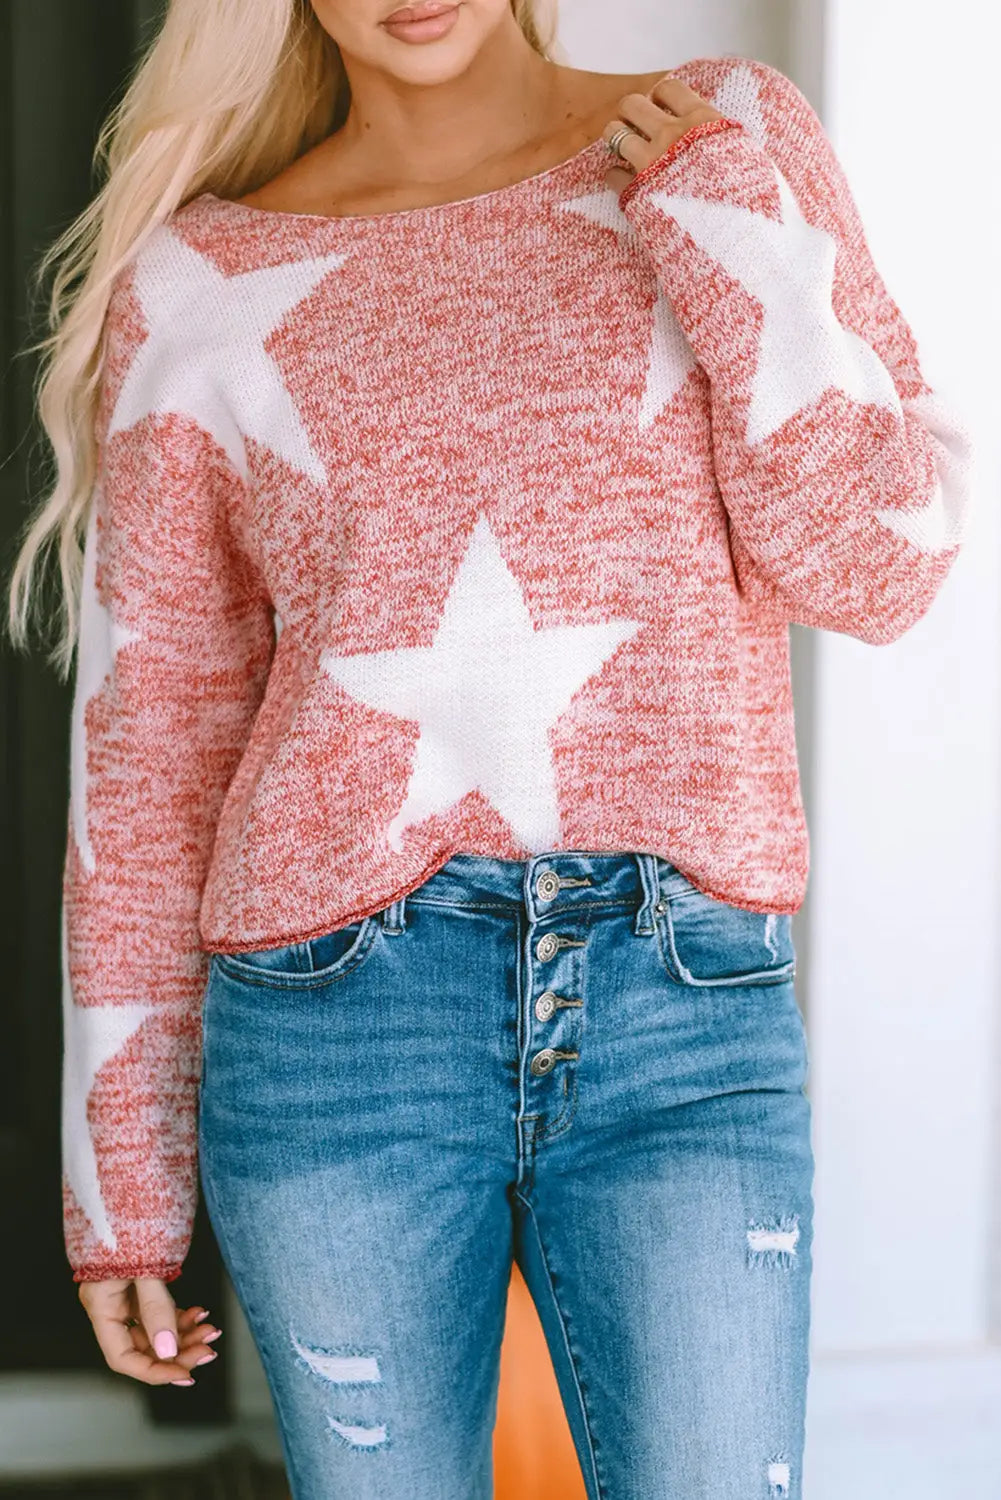 Big star spangled casual knit sweater - sweaters & cardigans